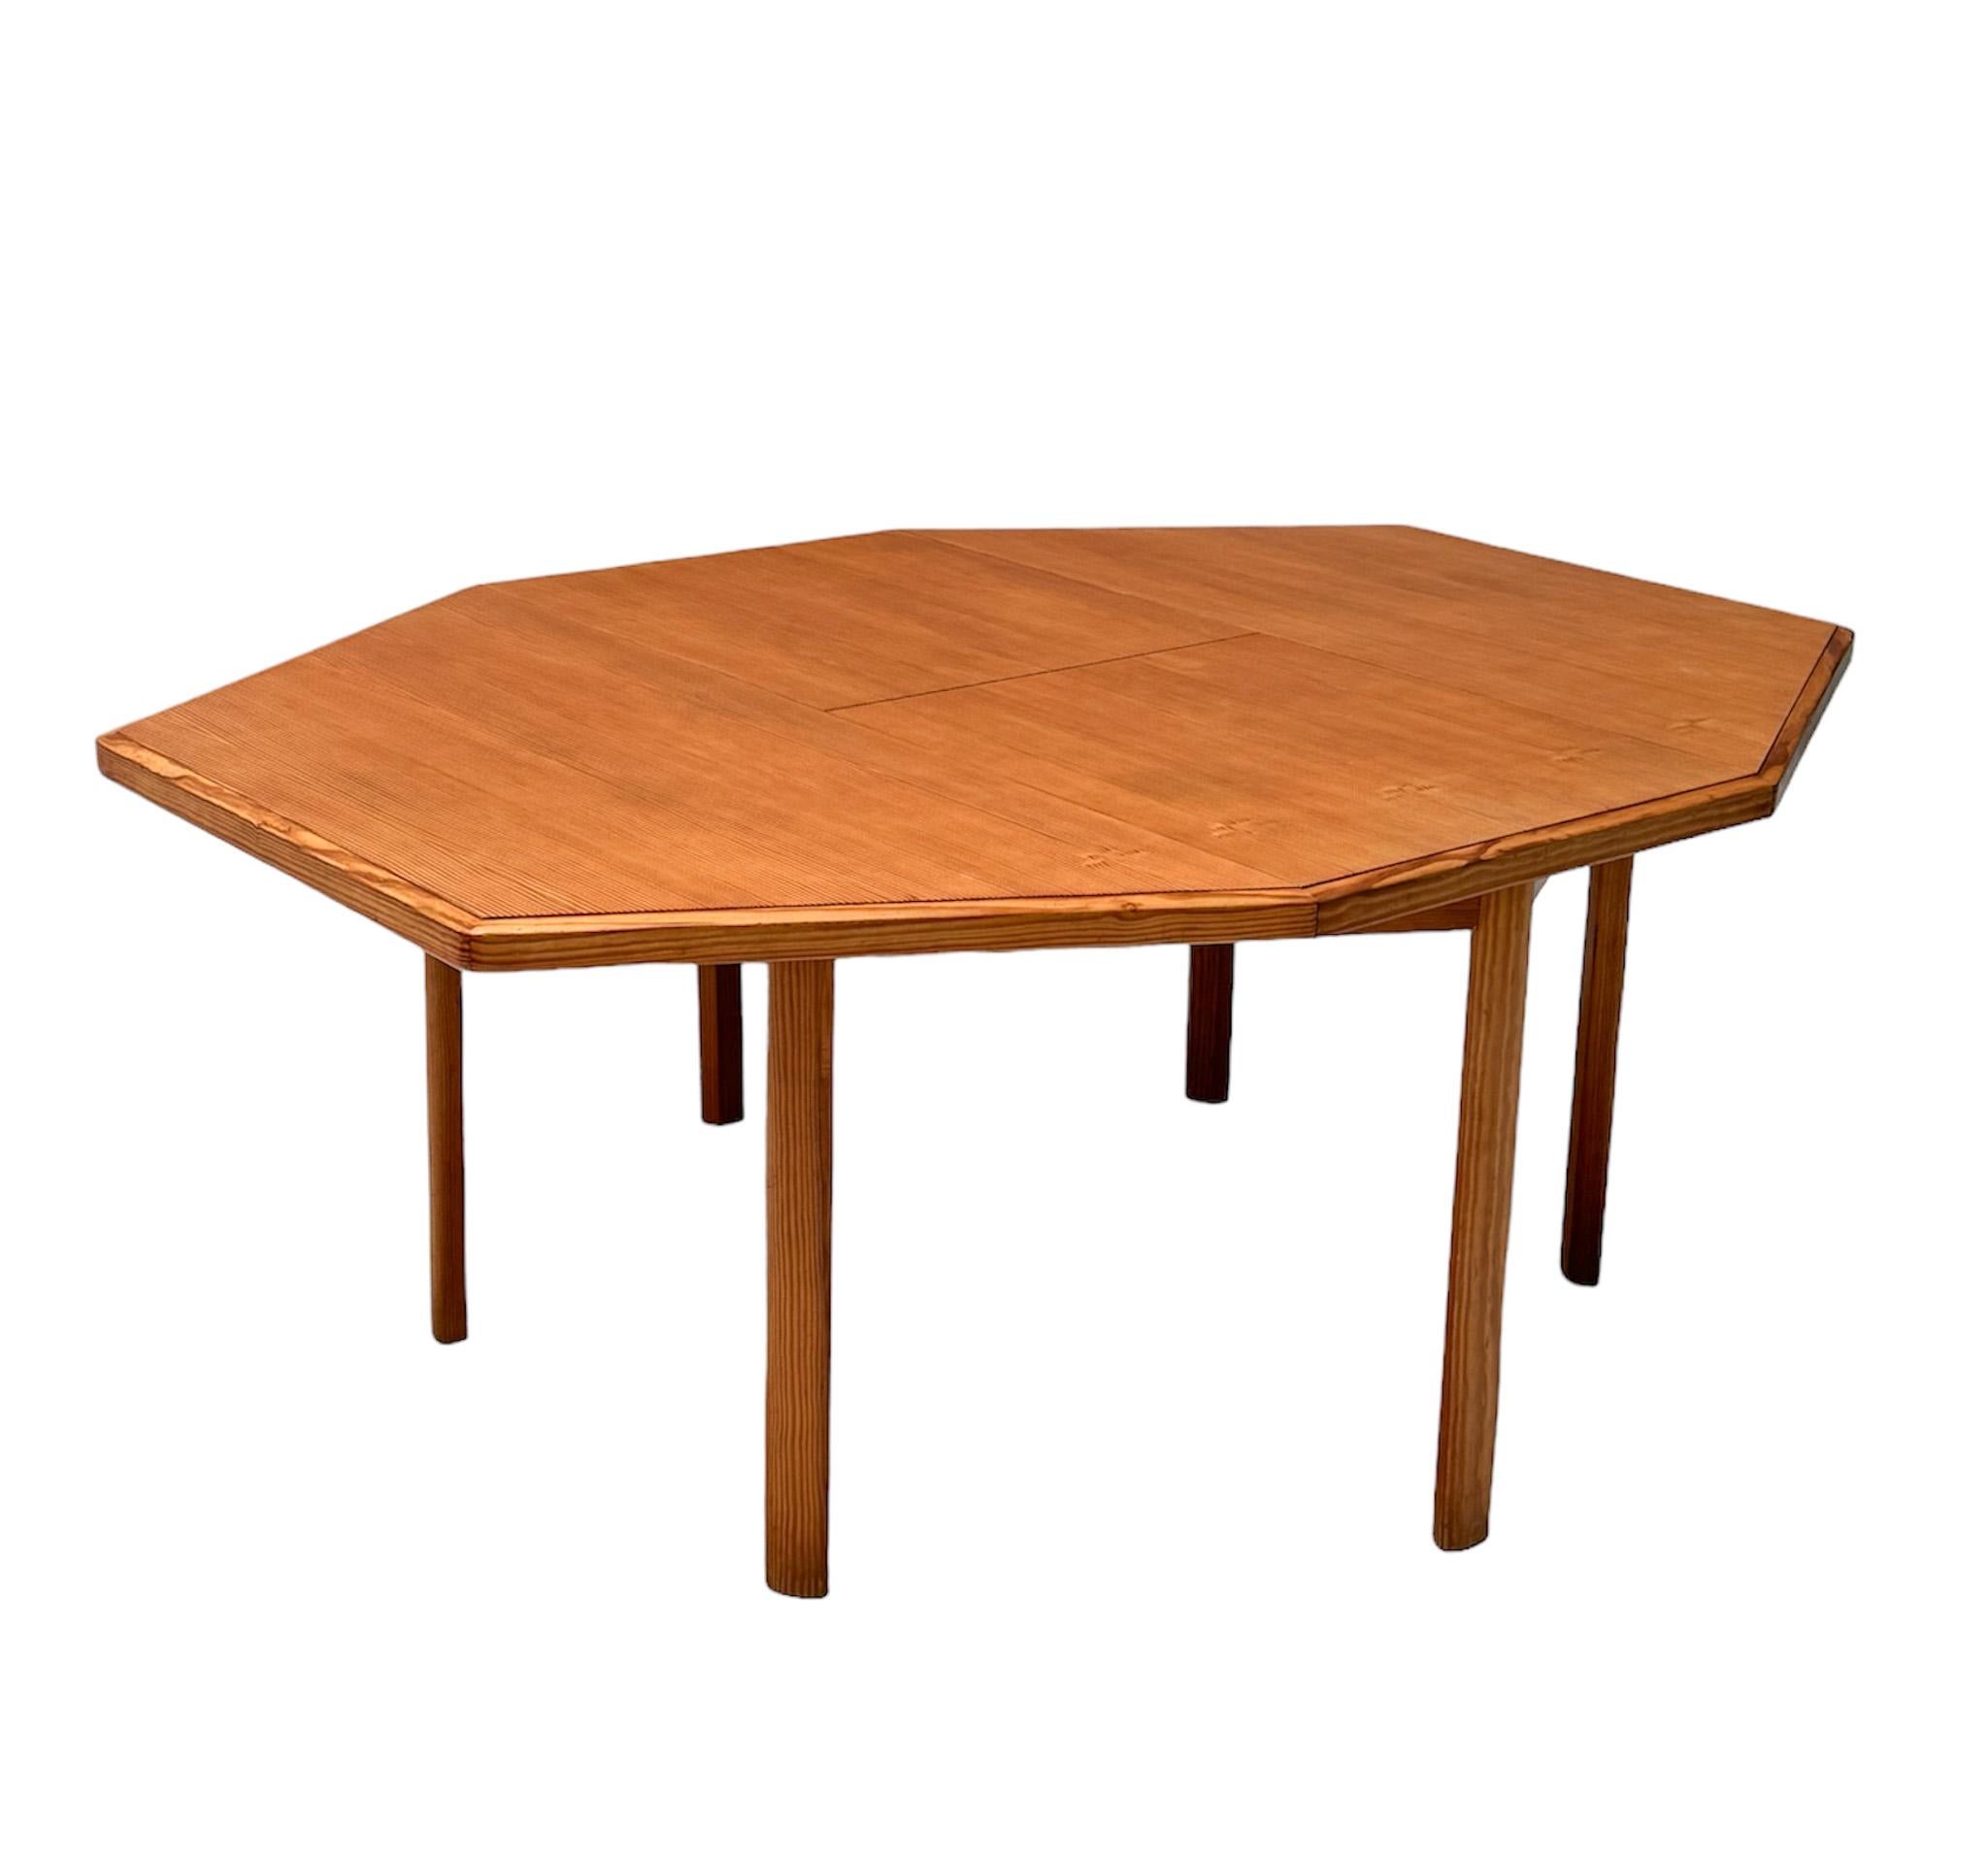 French Pine Mid-Century Modern Extendable Dining Room Table, 1970s For Sale 3